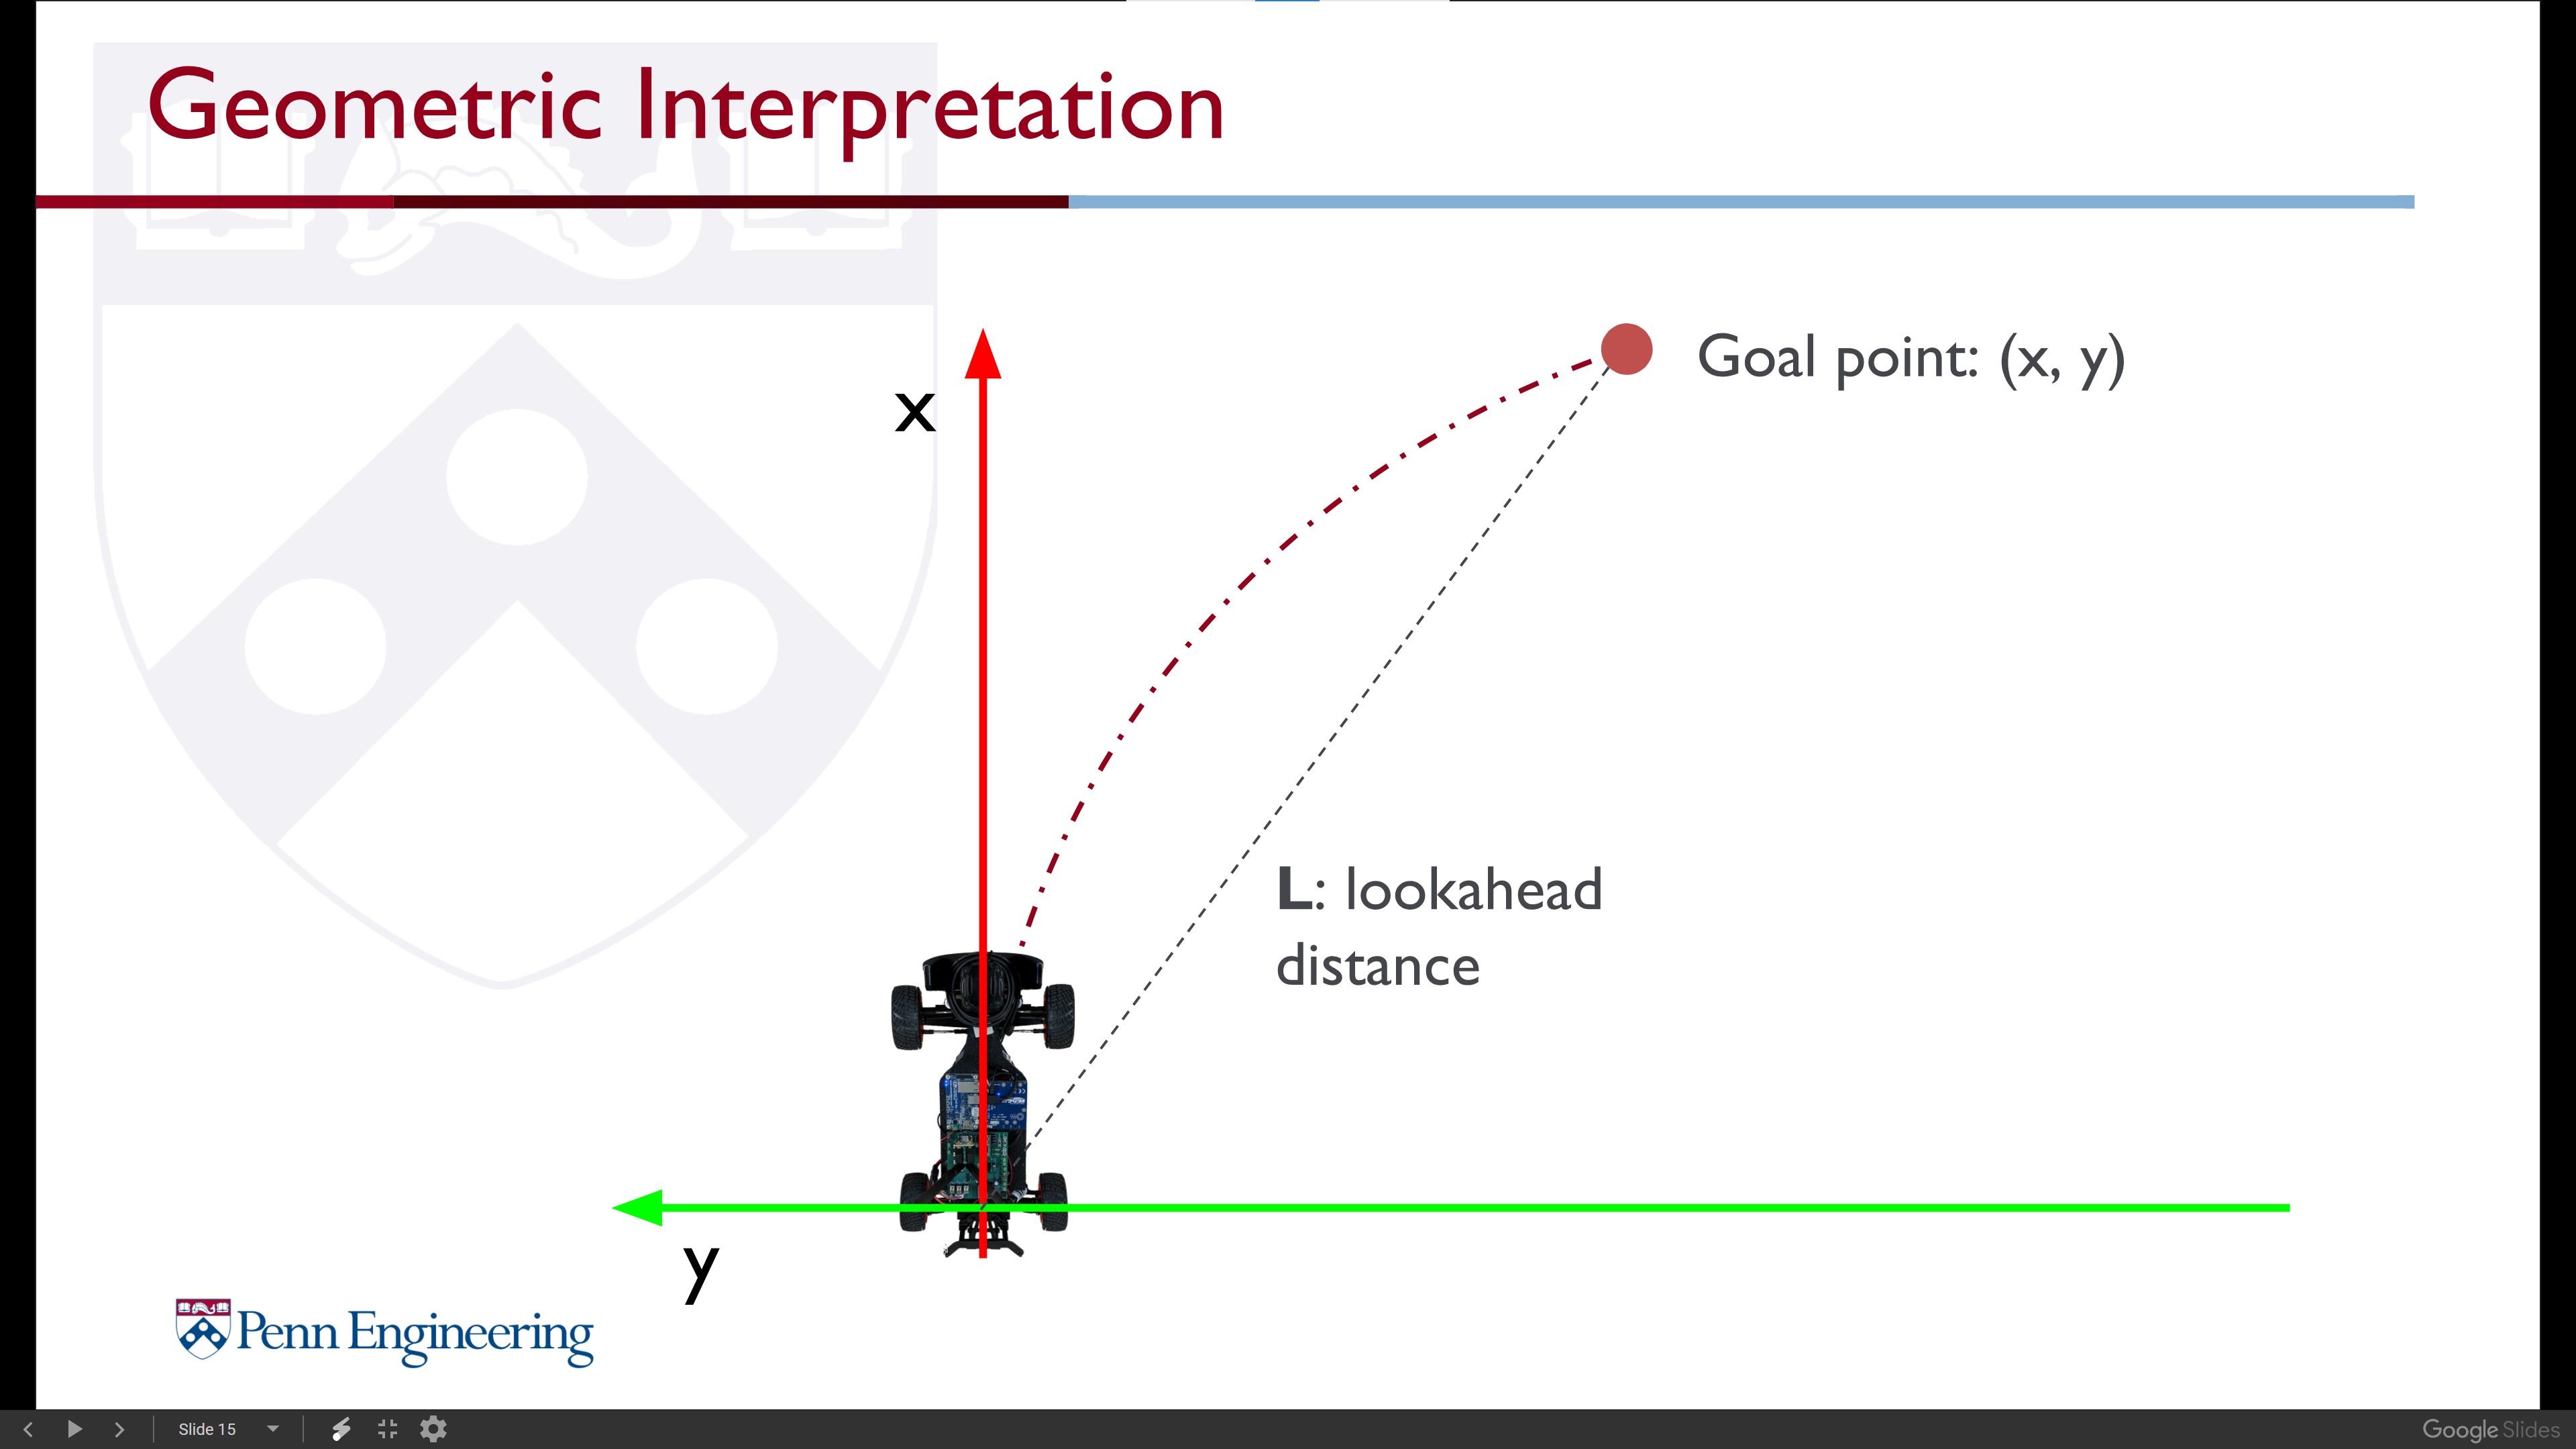 Arc interpolation between current position and goal.